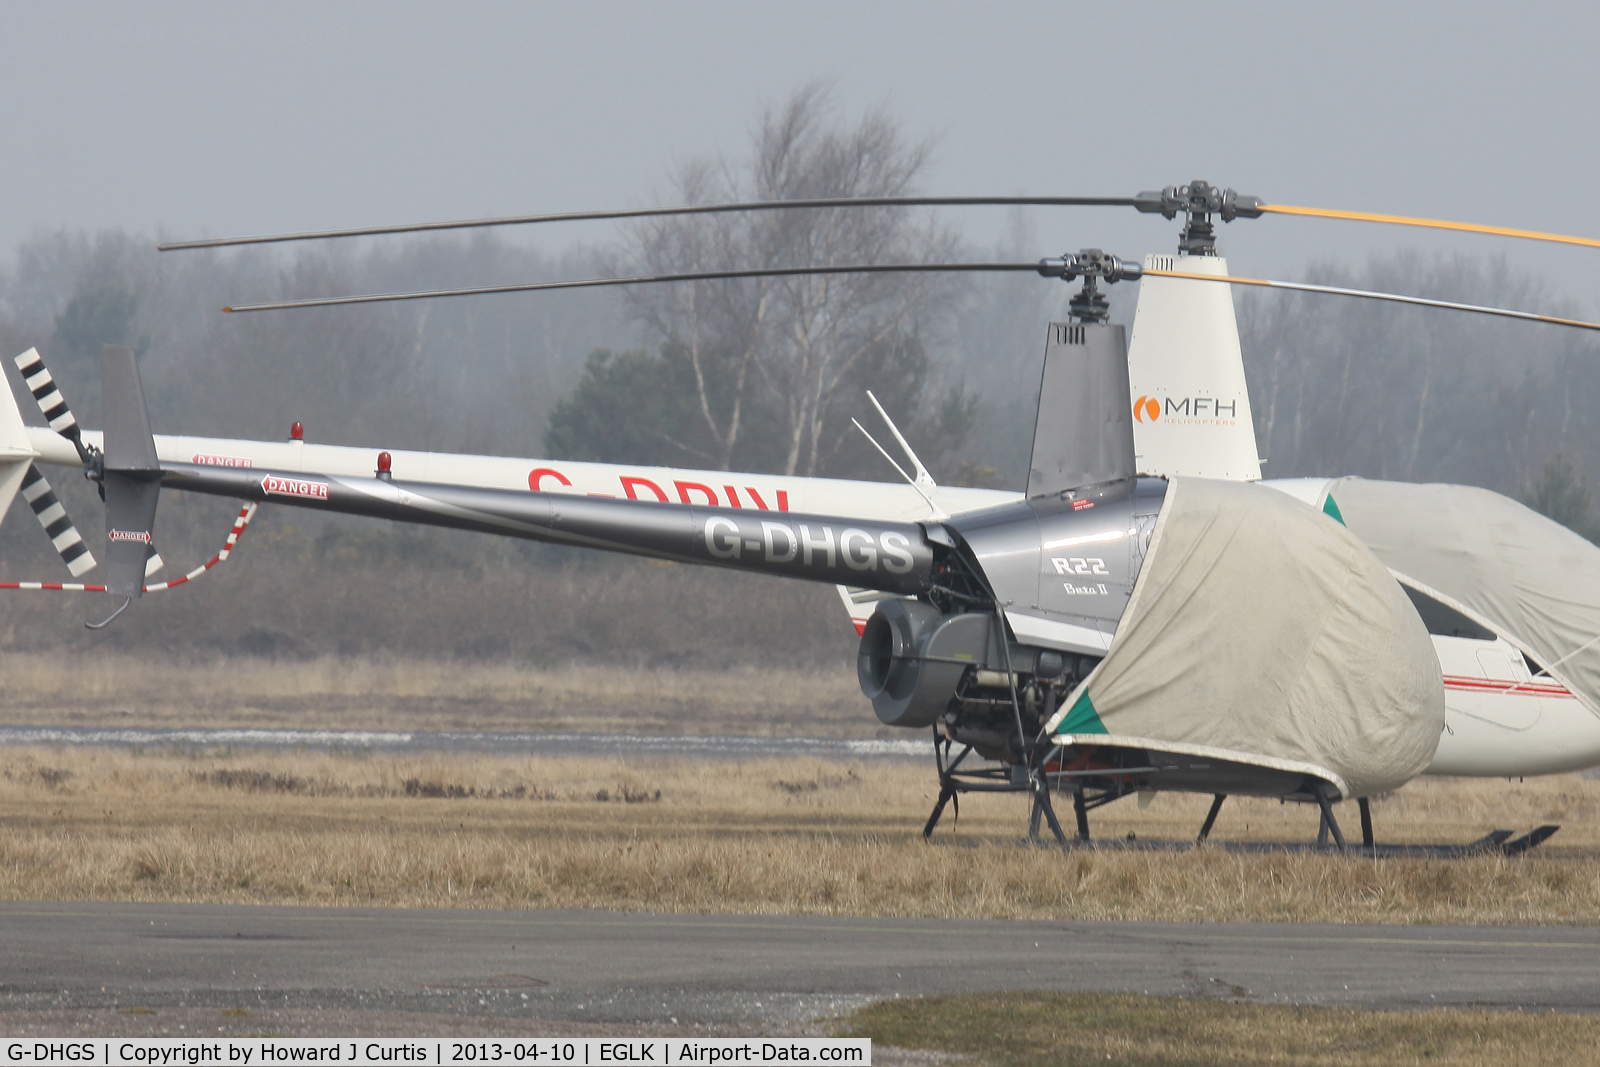 G-DHGS, 1996 Robinson R22 Beta C/N 2592, Privately owned.